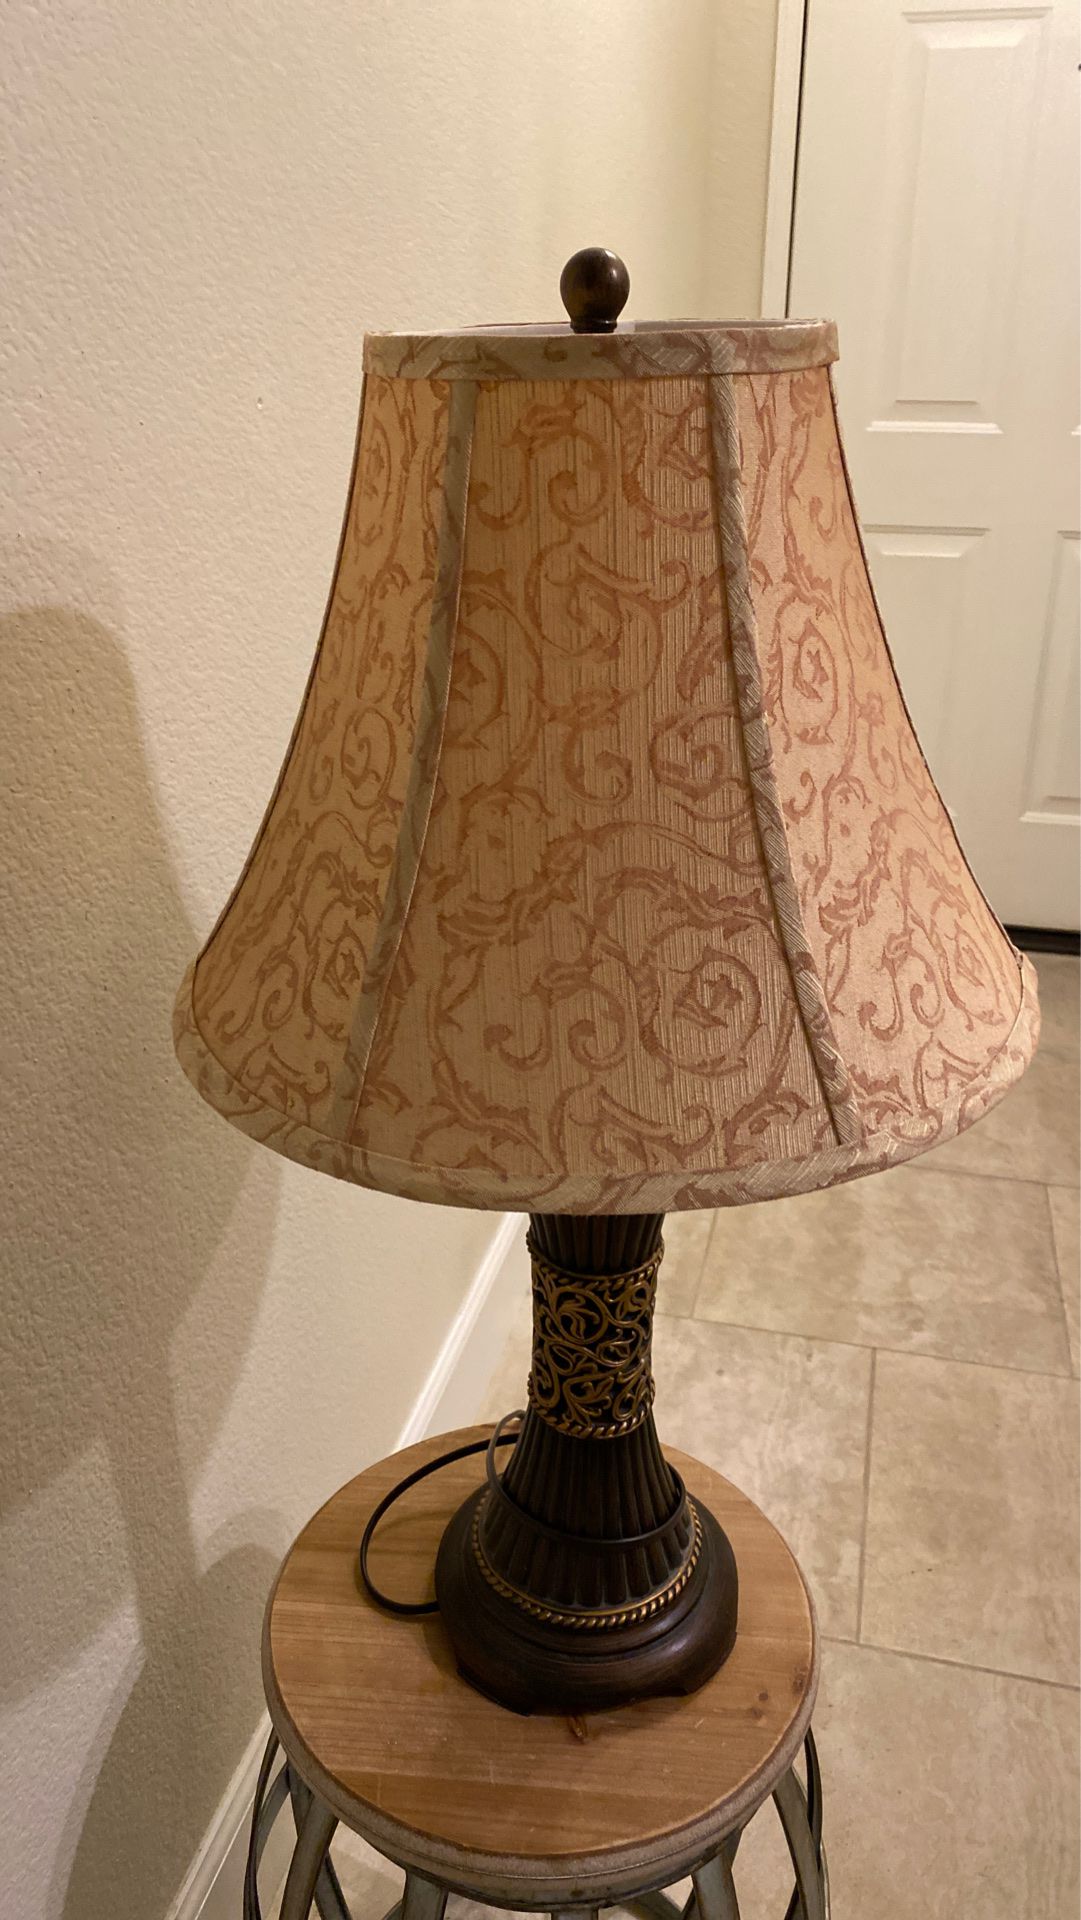 Lamp two available